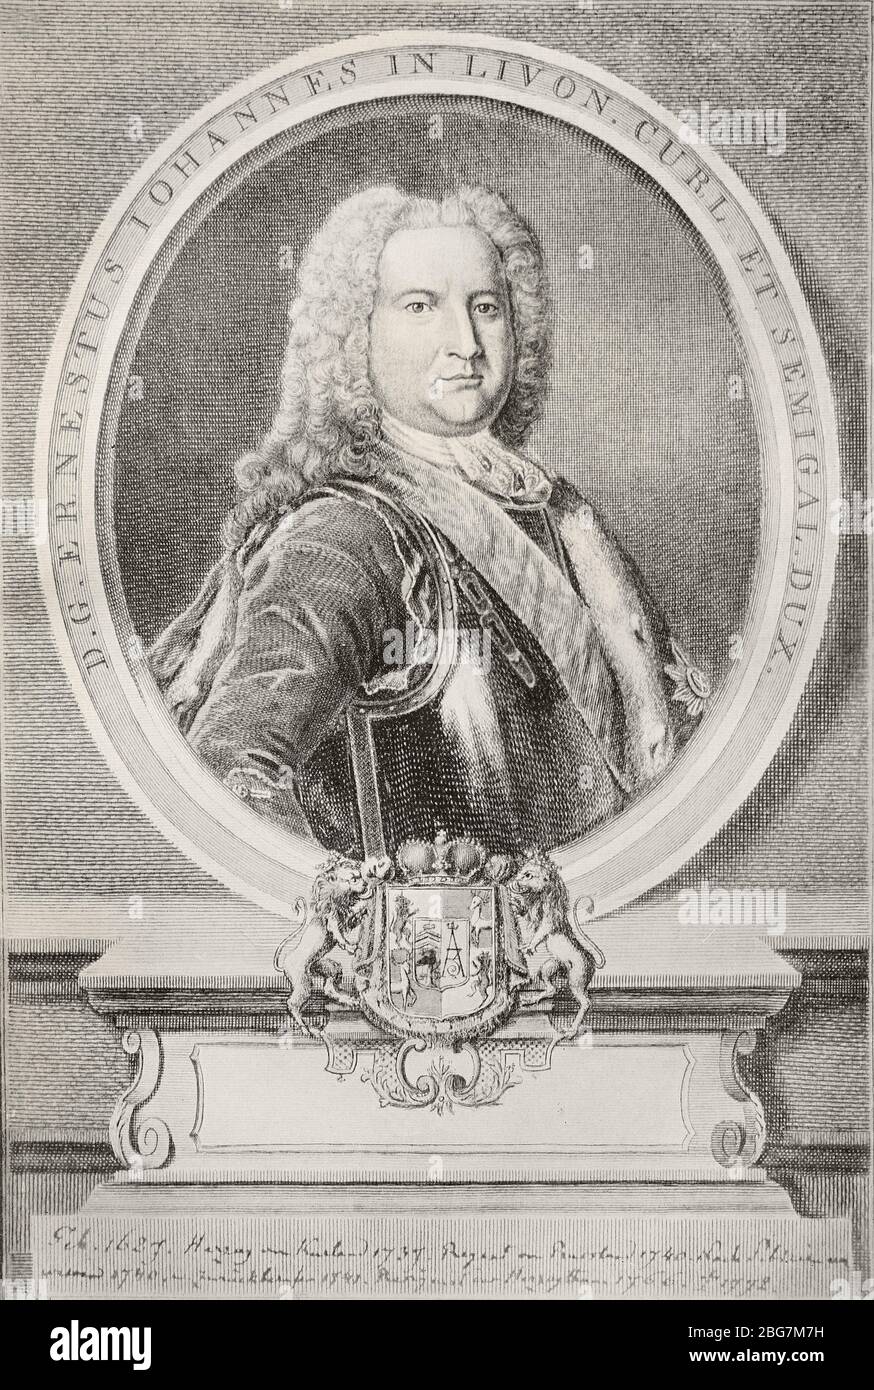 Portrait of Ernst Johann von Biron. He was a Duke of Courland and Semigallia (1737-1740 and 1763-1769) and briefly regent of the Russian Empire in 1740. Stock Photo